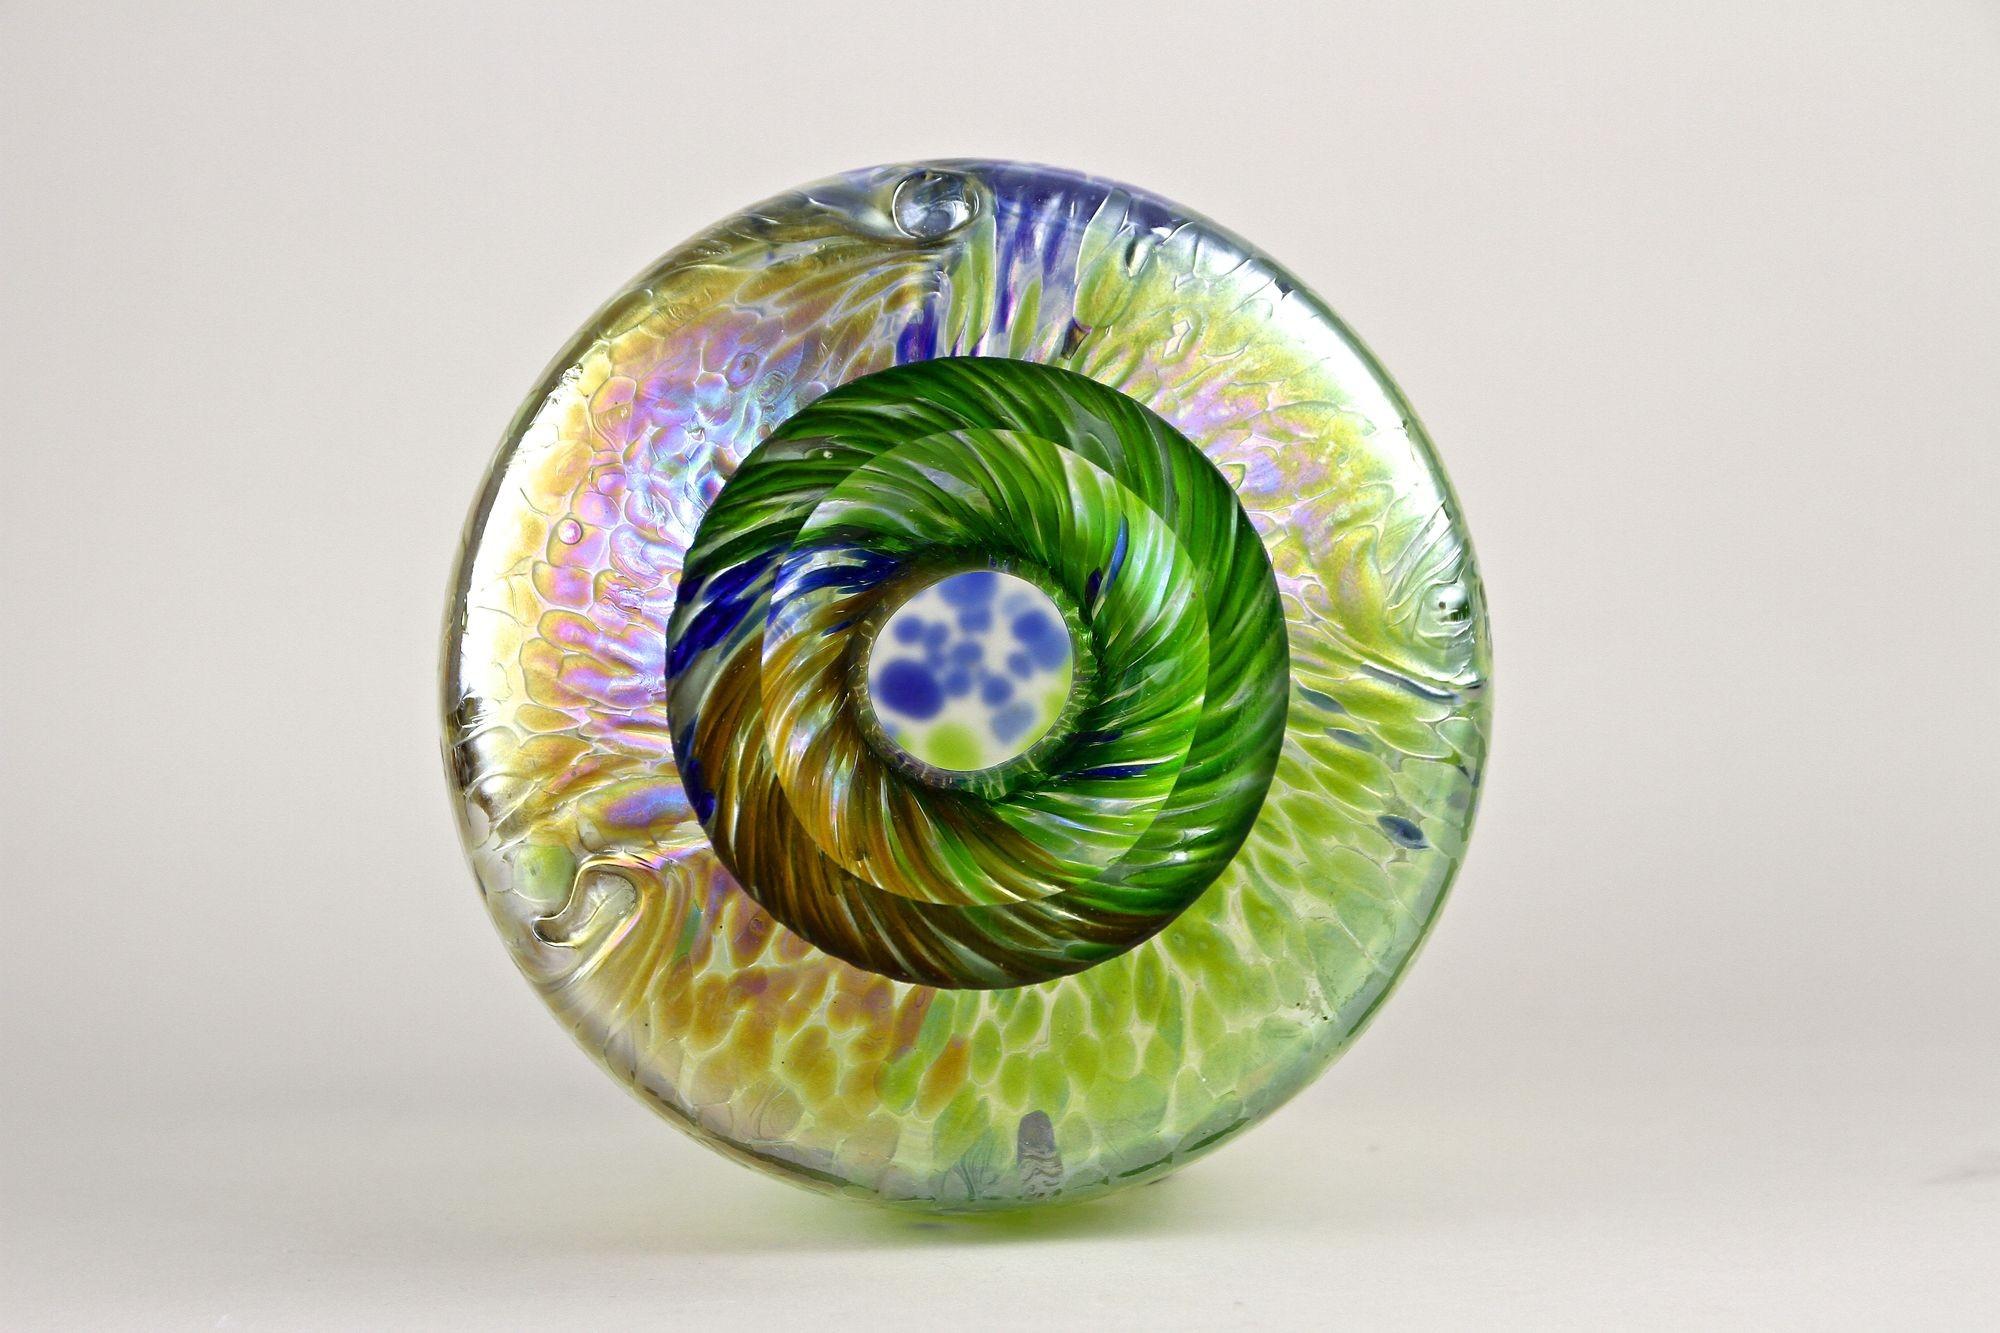 Iridescent Art Nouveau Glass Vase Attributed To Fritz Heckert, Bohemia ca. 1905 For Sale 10